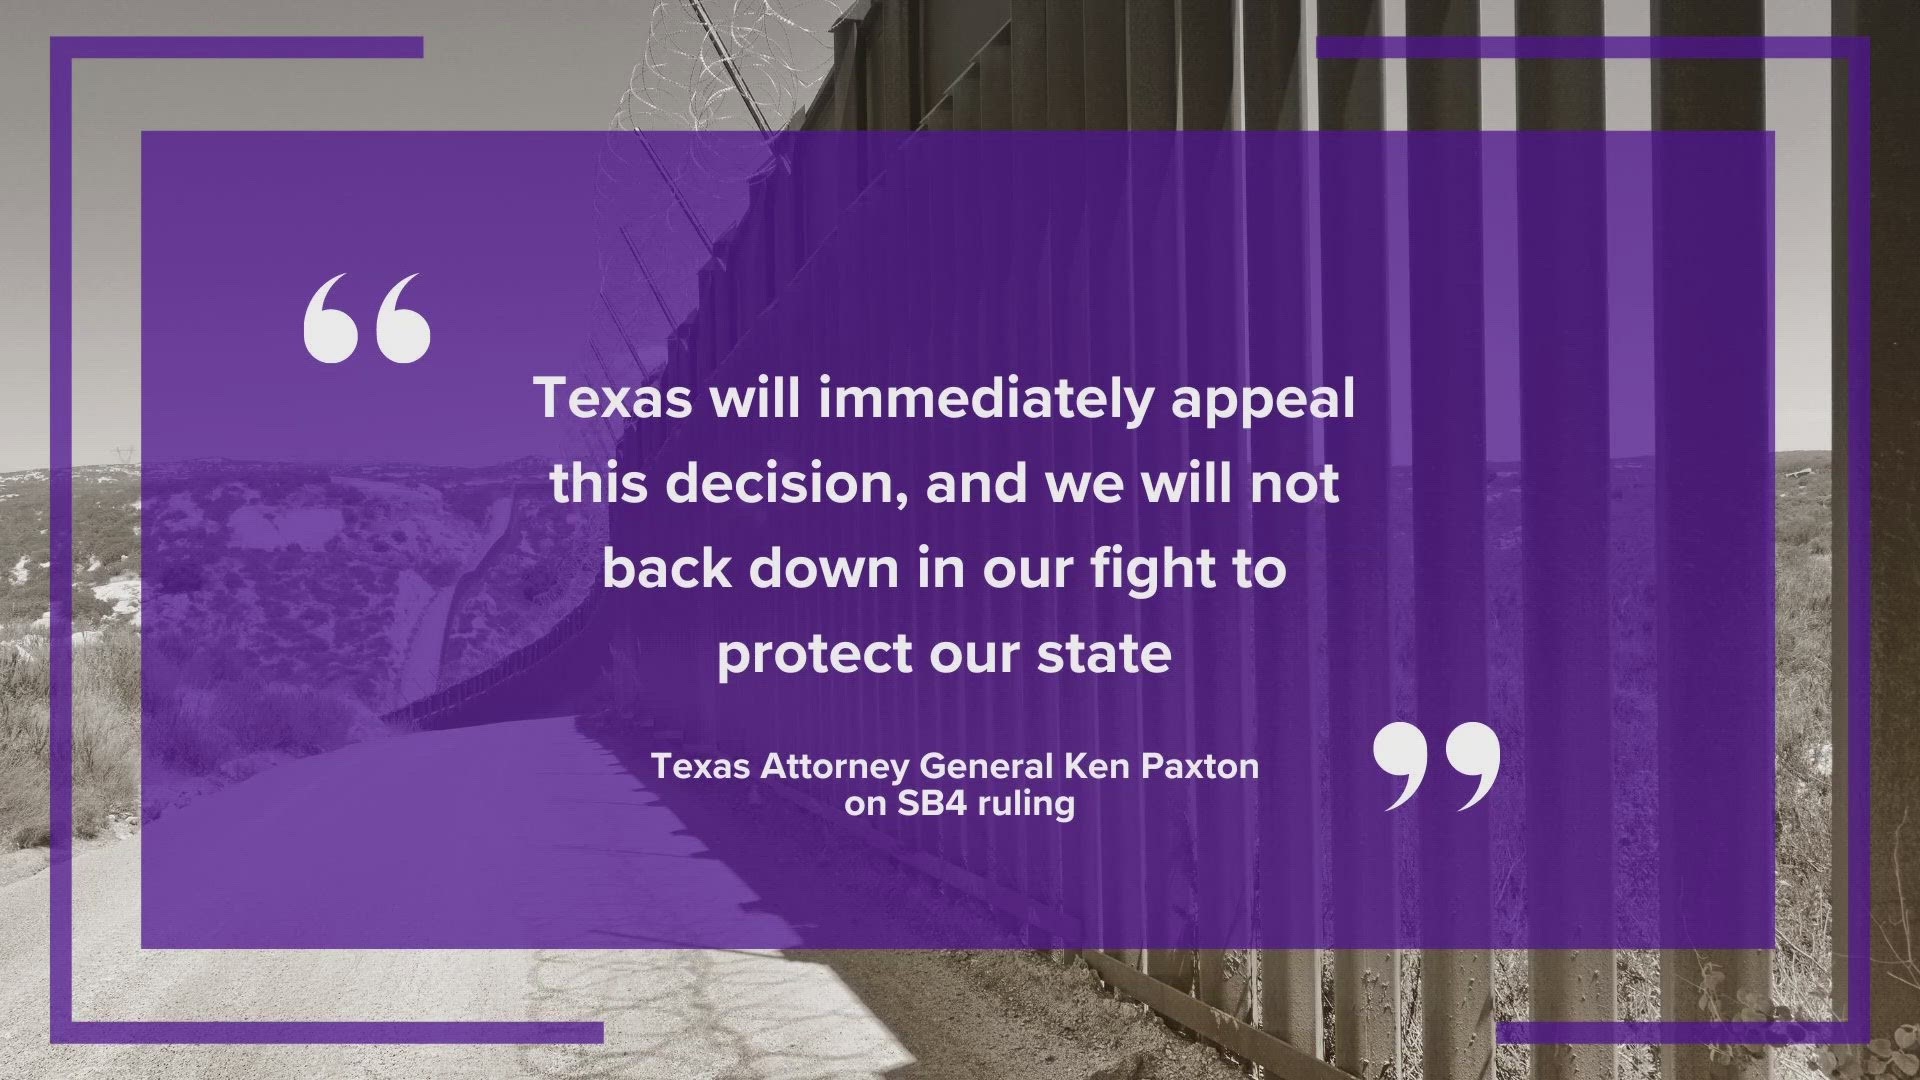 A federal judge halted a new state law that would allow Texas police to arrest people suspected of crossing the Texas-Mexico border illegally.